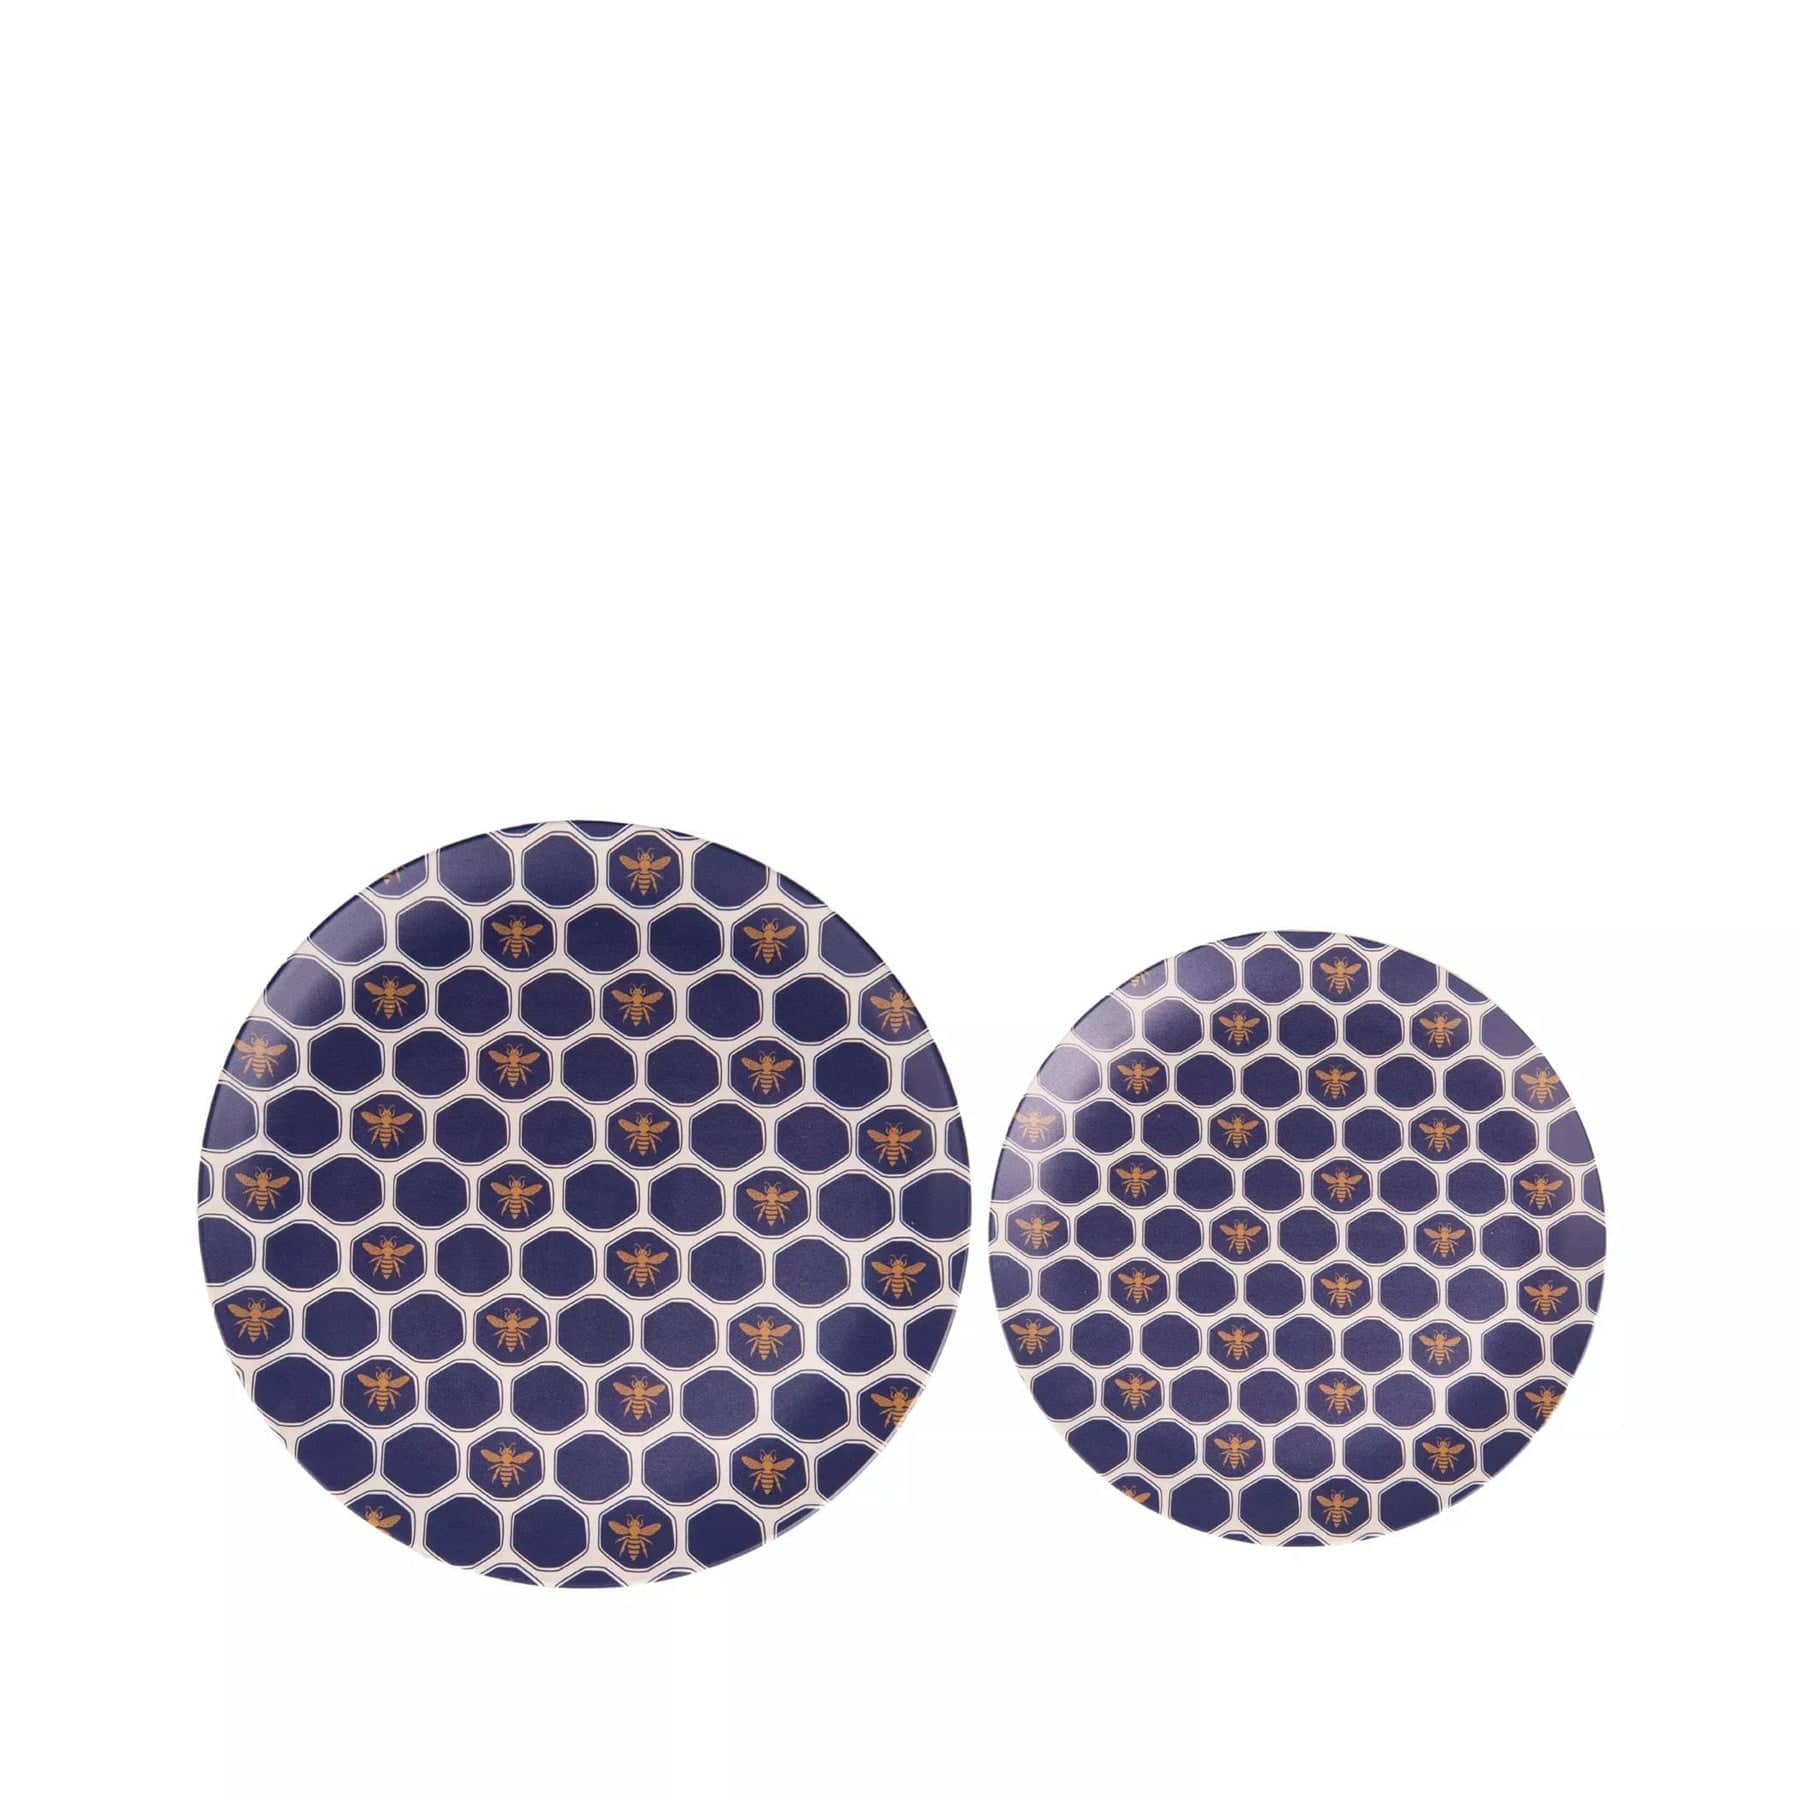 Two round ceramic plates with blue geometric pattern and gold accents isolated on white background